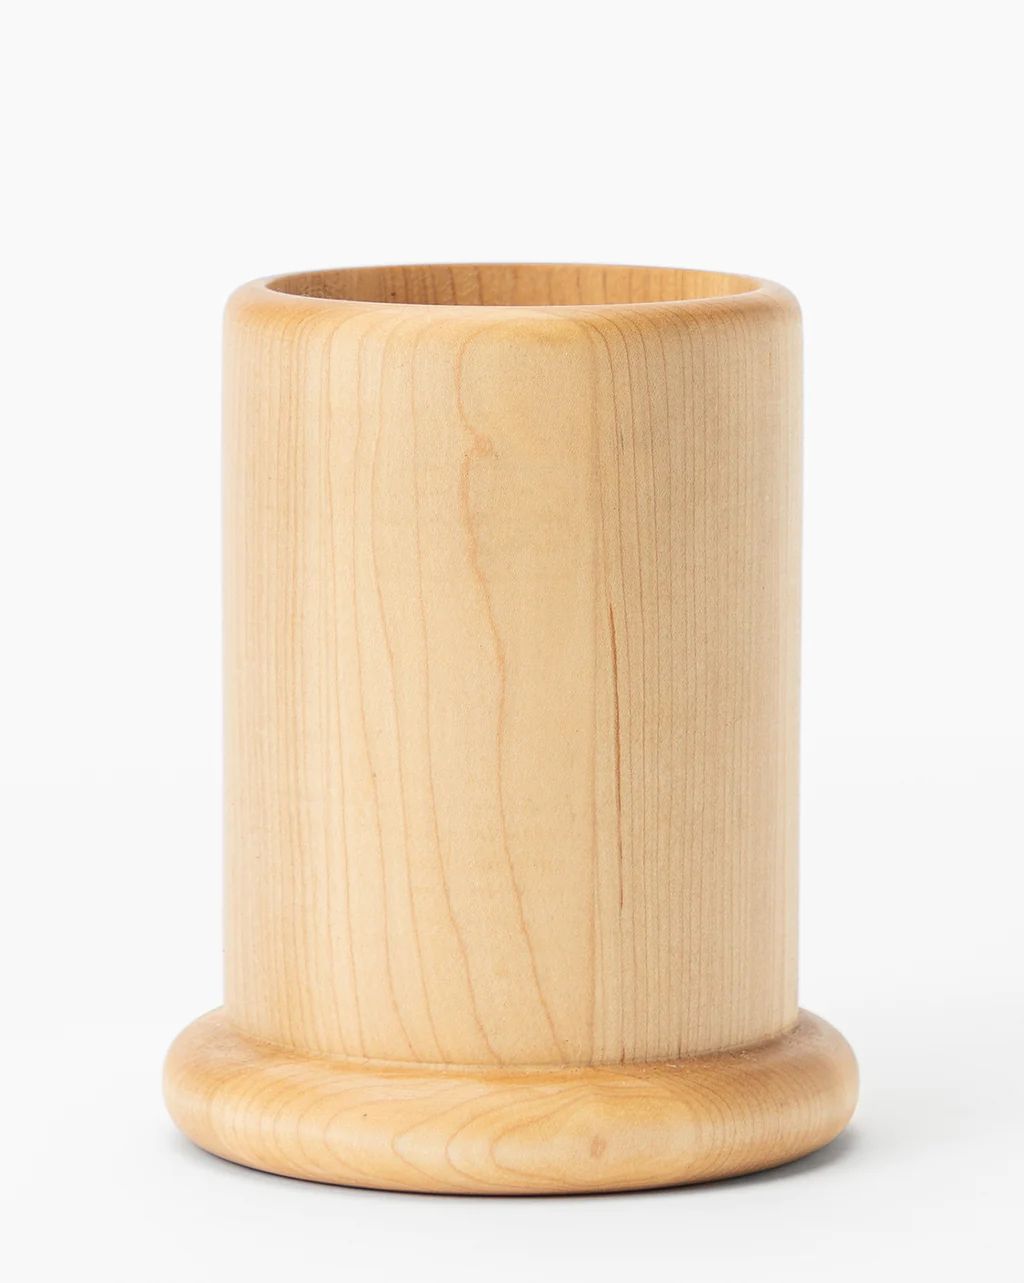 Wooden Crock | McGee & Co.